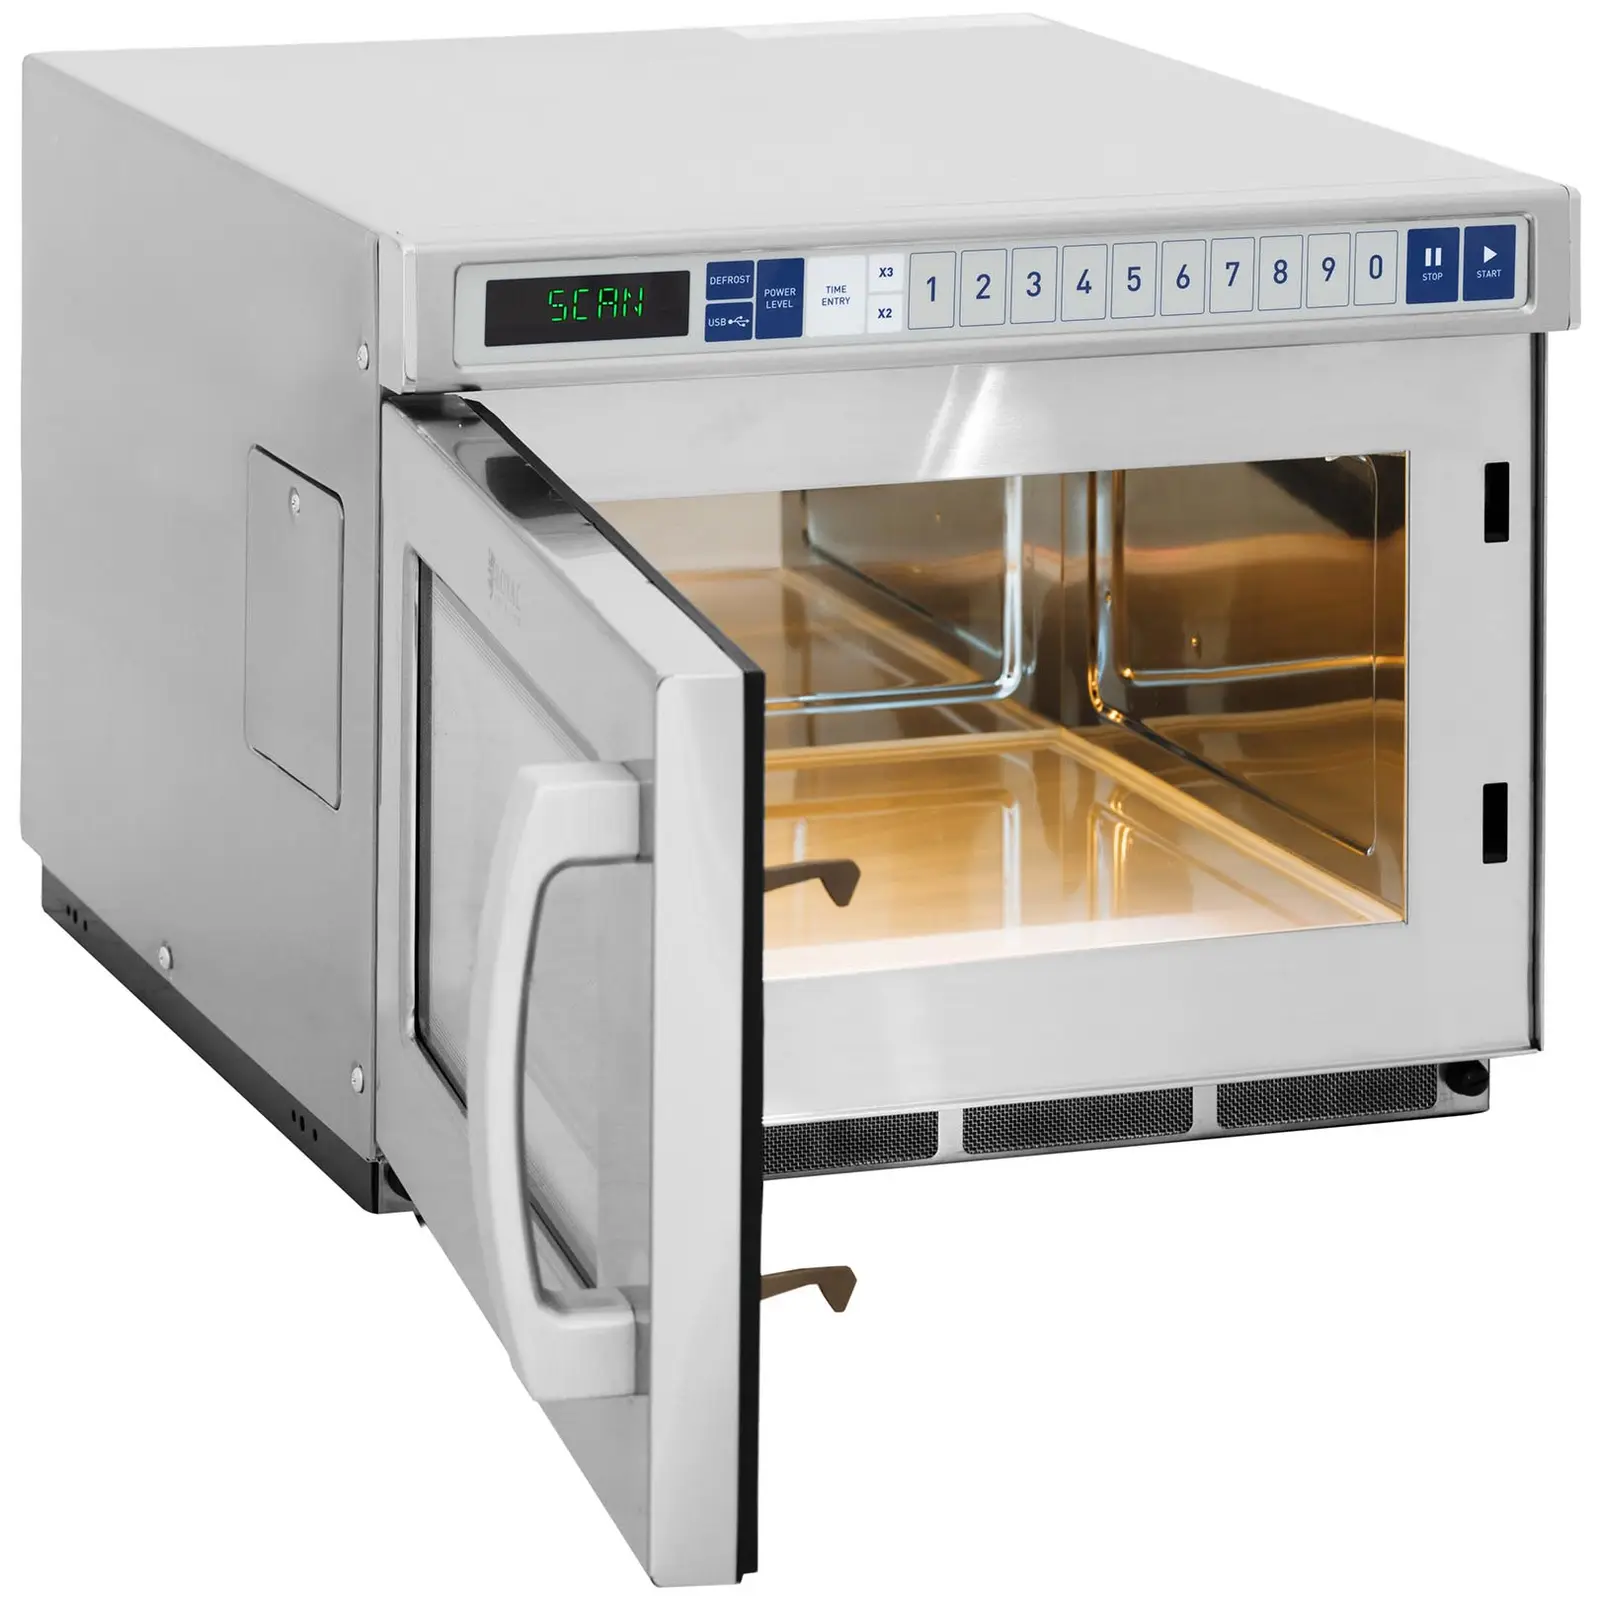 Microwave - 3000 W - 17 L - Royal Catering - 1